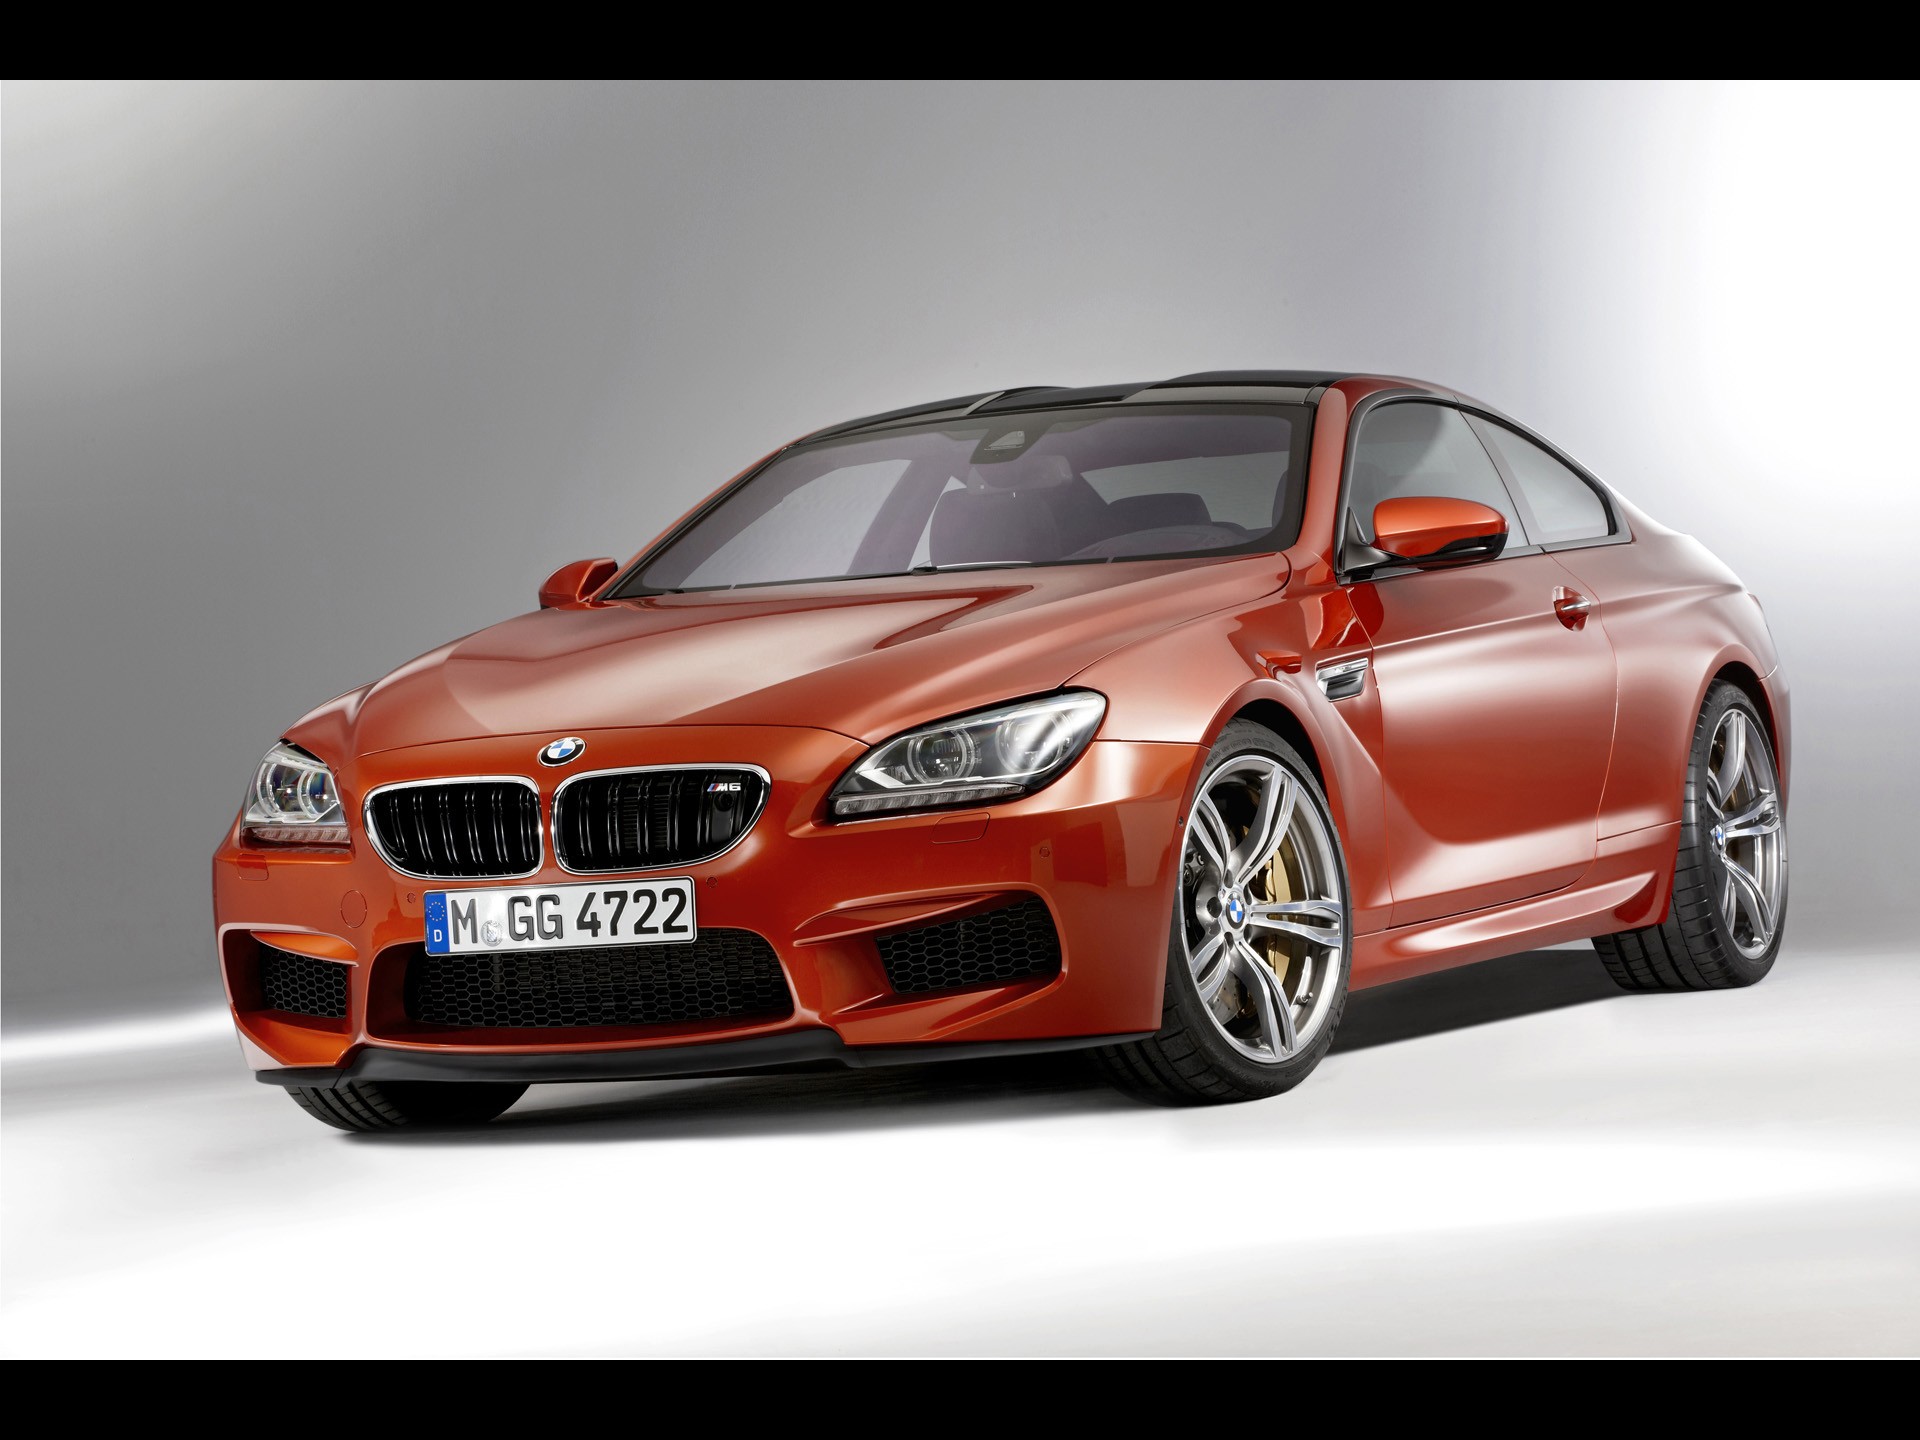 bmw, Red, Cars, Vehicles, Coupe, Bmw, M6 Wallpaper